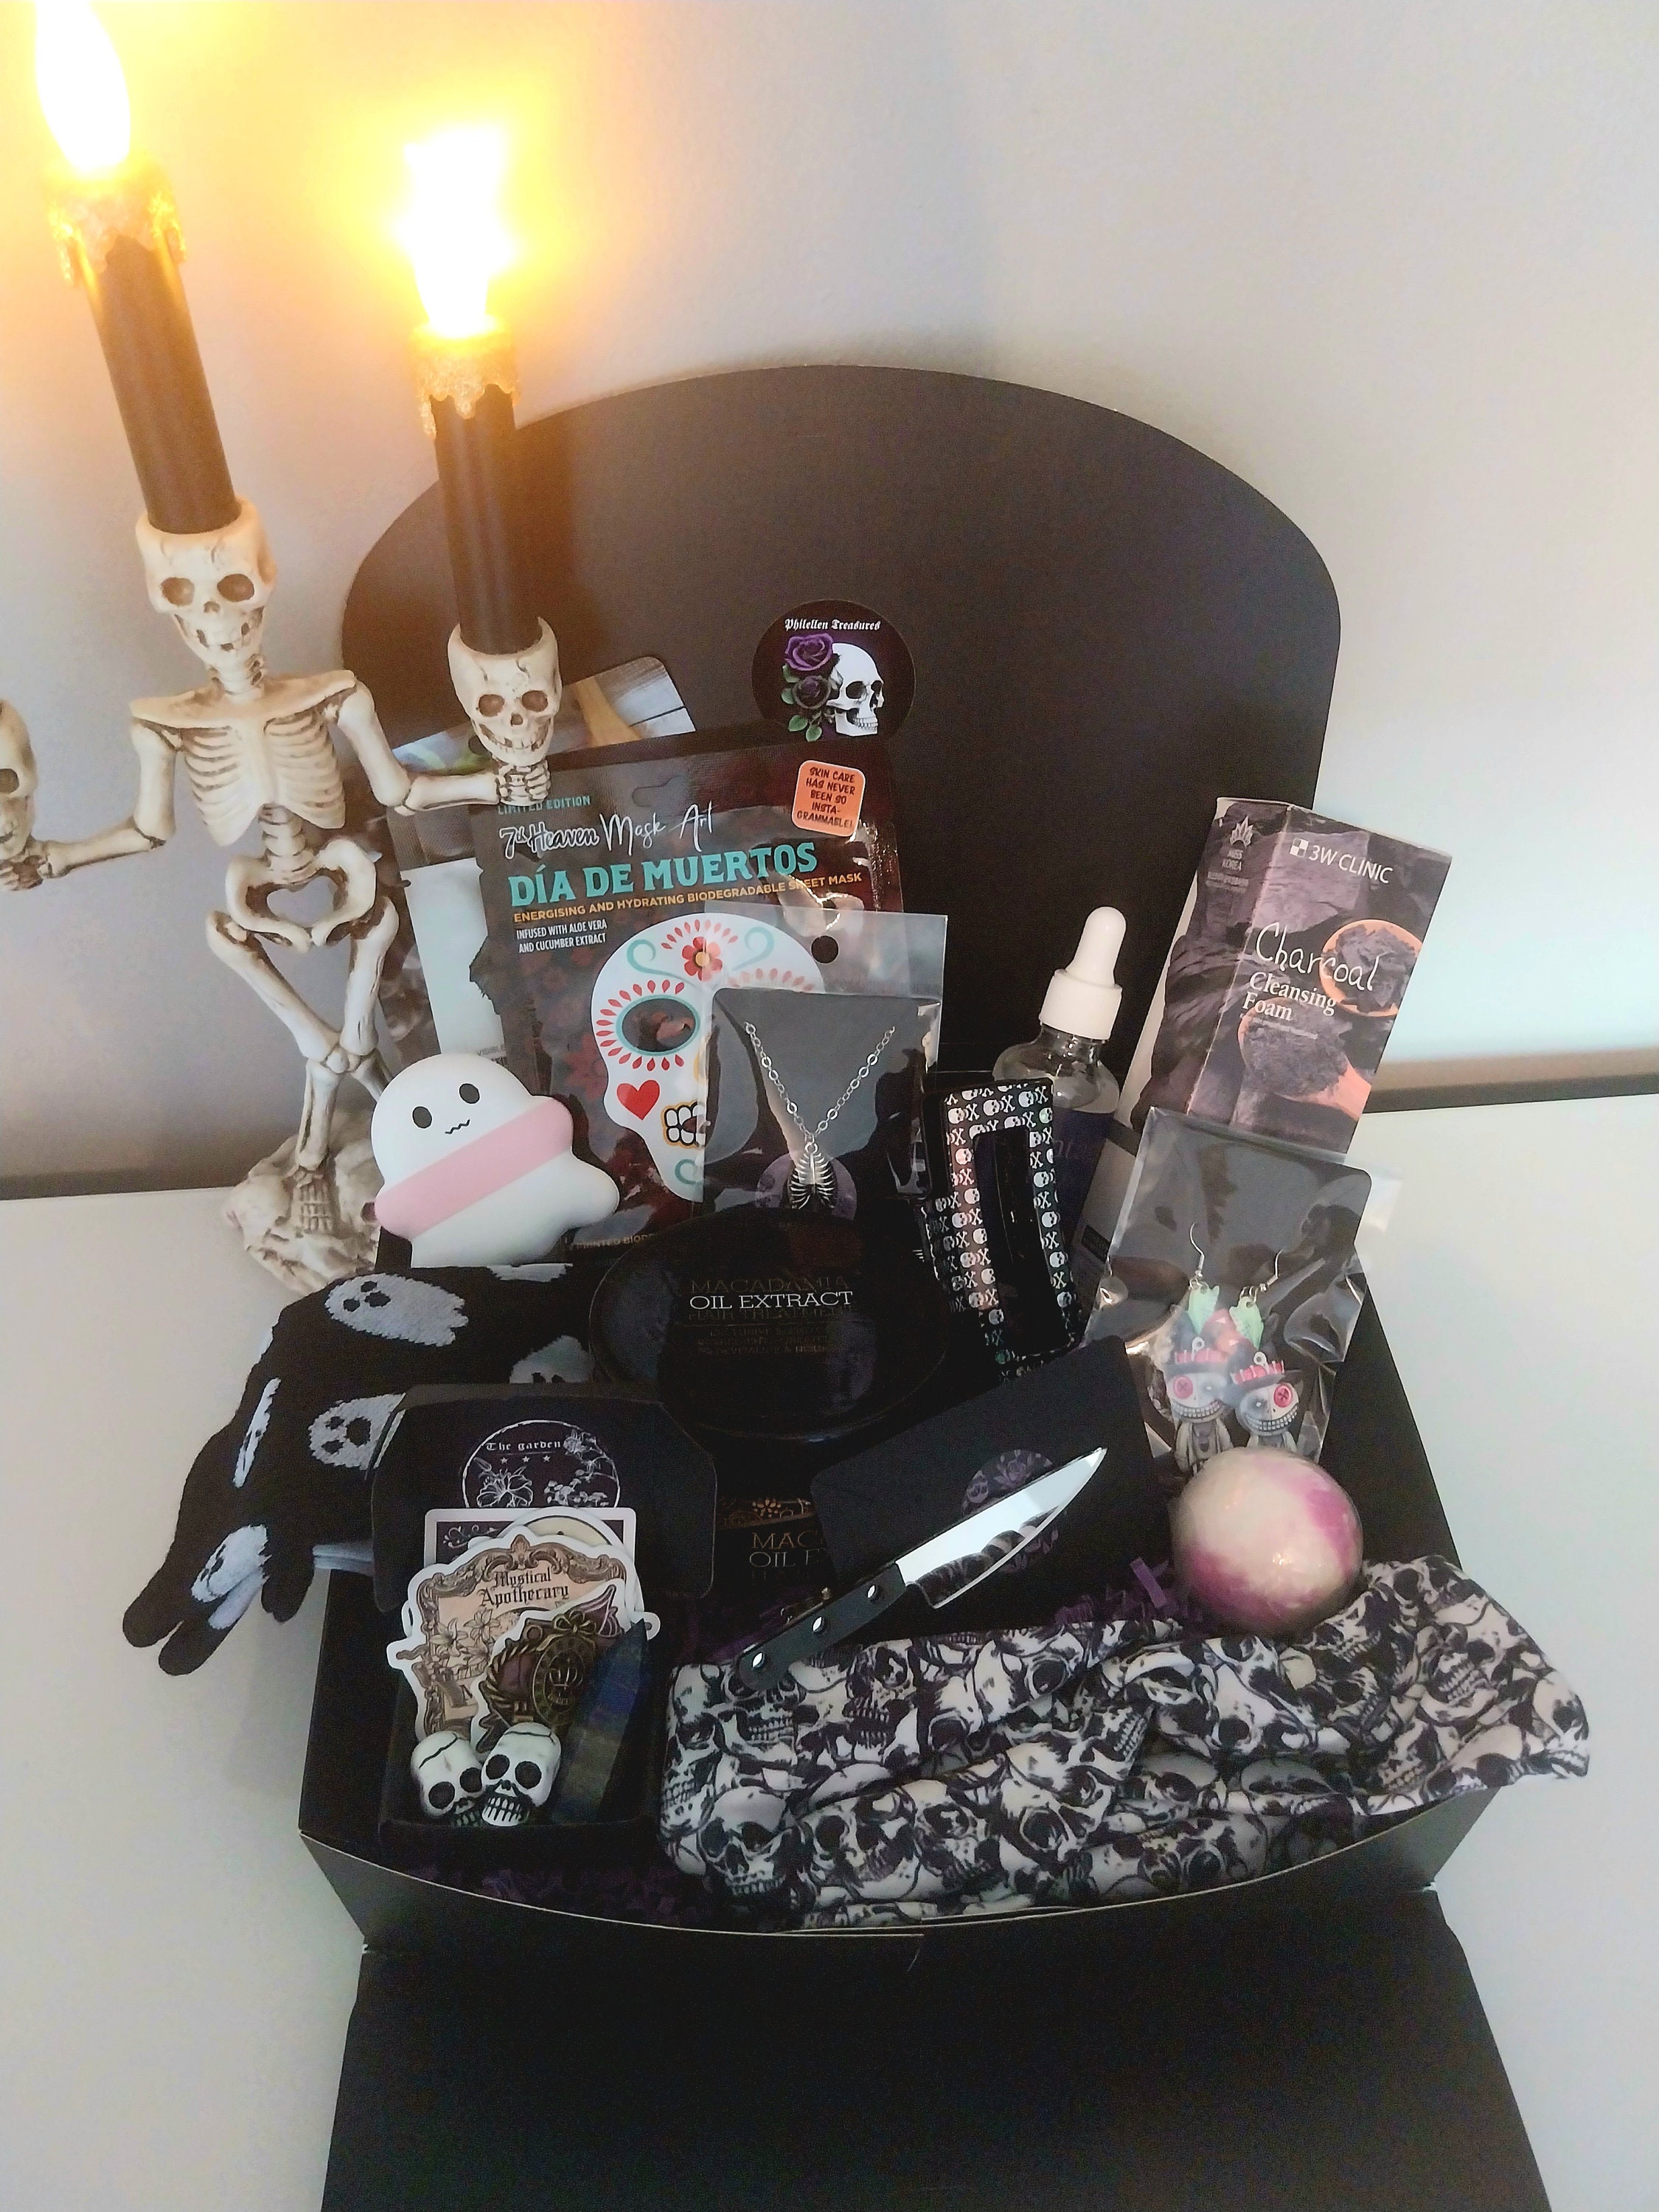 New Goth Mother Gift Basket – Witching Hour Baby